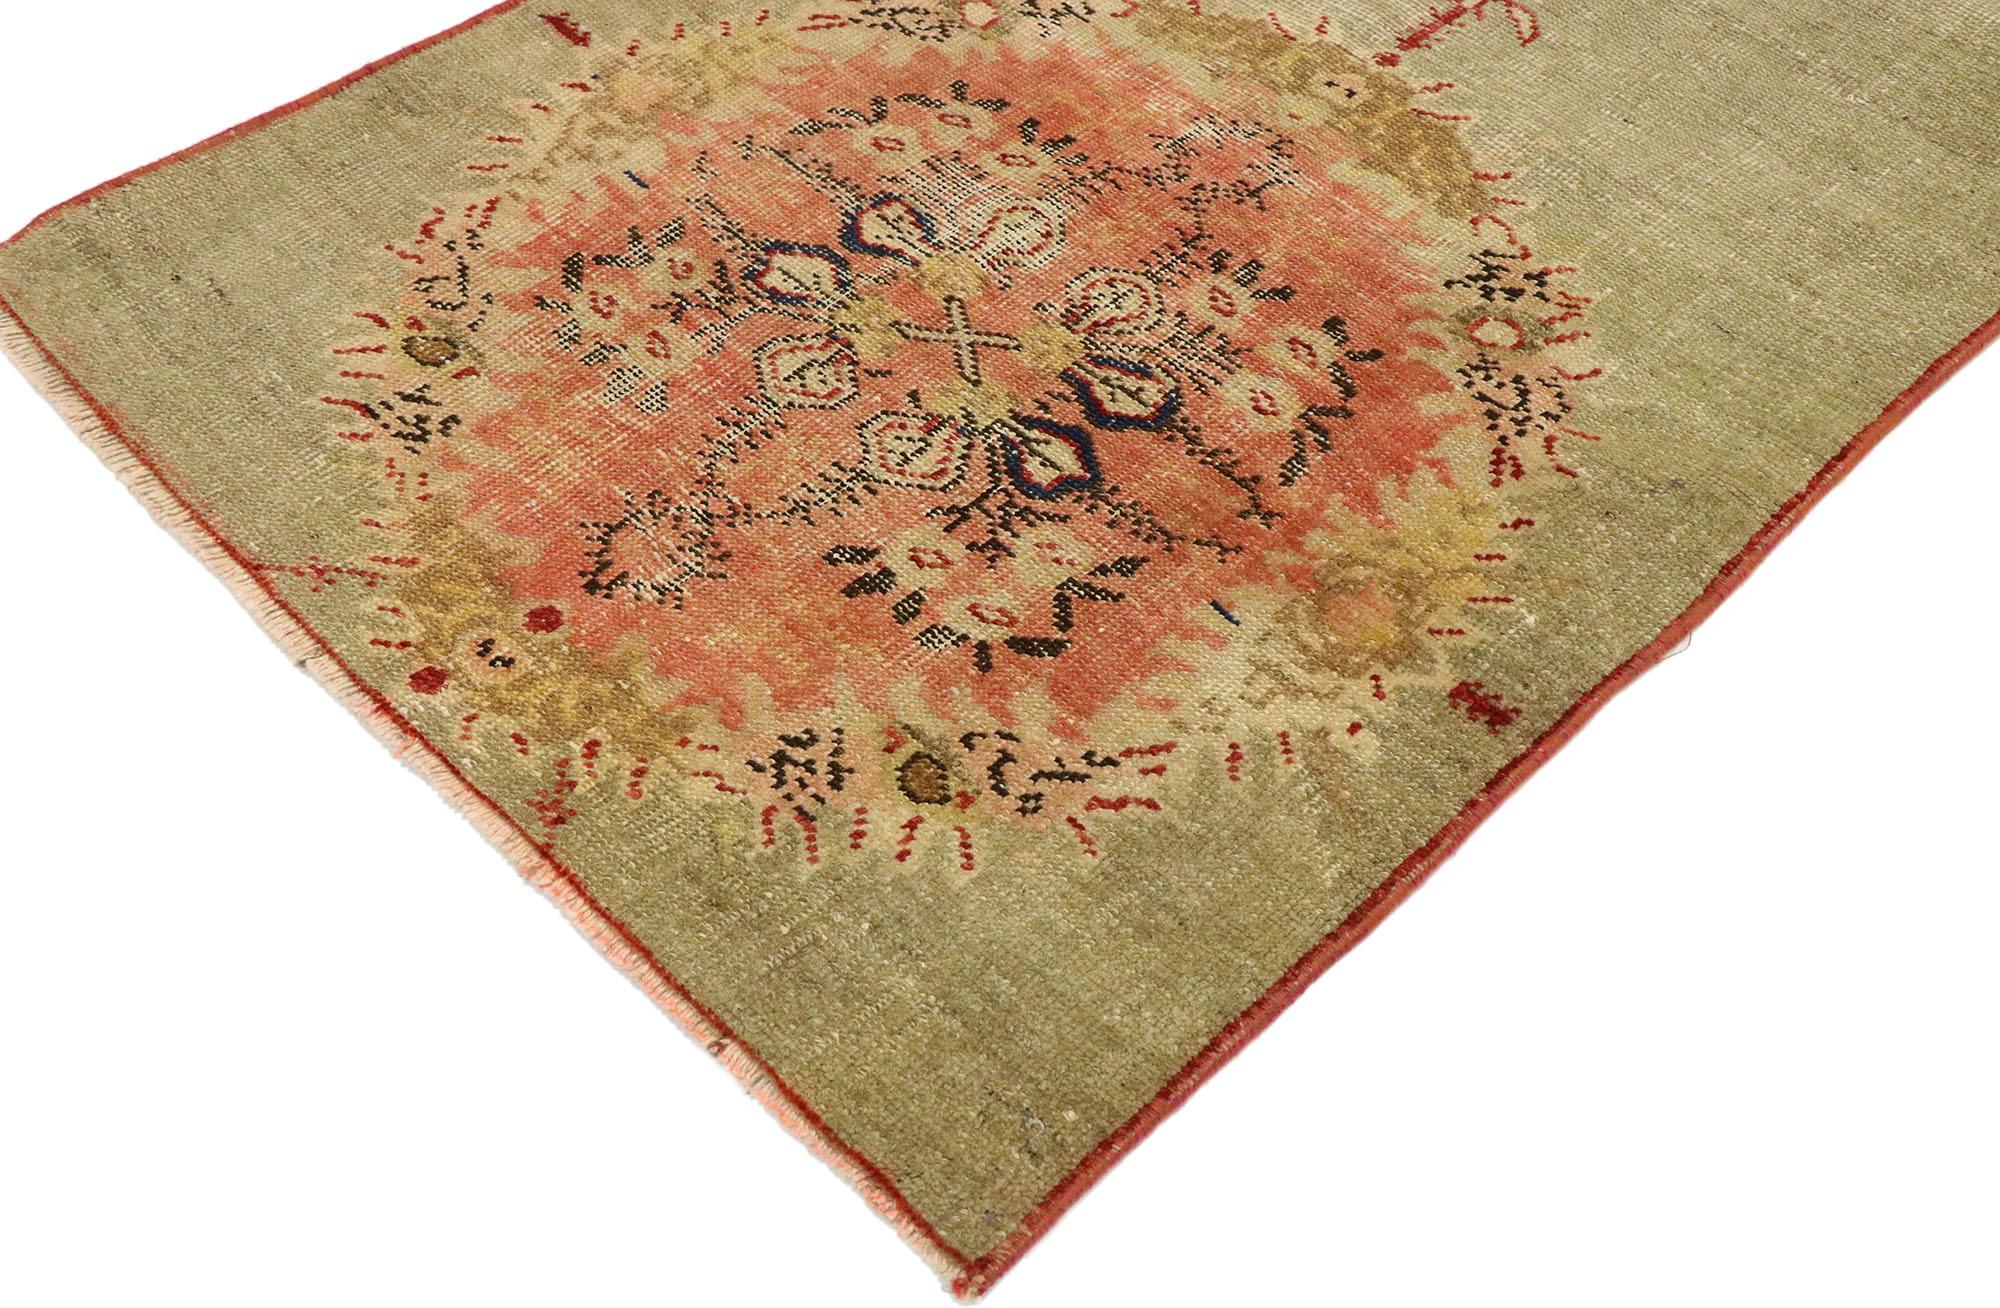 53061, distressed vintage Turkish Oushak rug with Romantic Swedish Cottage style. Effortless beauty and romantic connotations meet soft, bespoke vibes with a Swedish farmhouse cottage style in this hand knotted wool distressed vintage Turkish Oushak